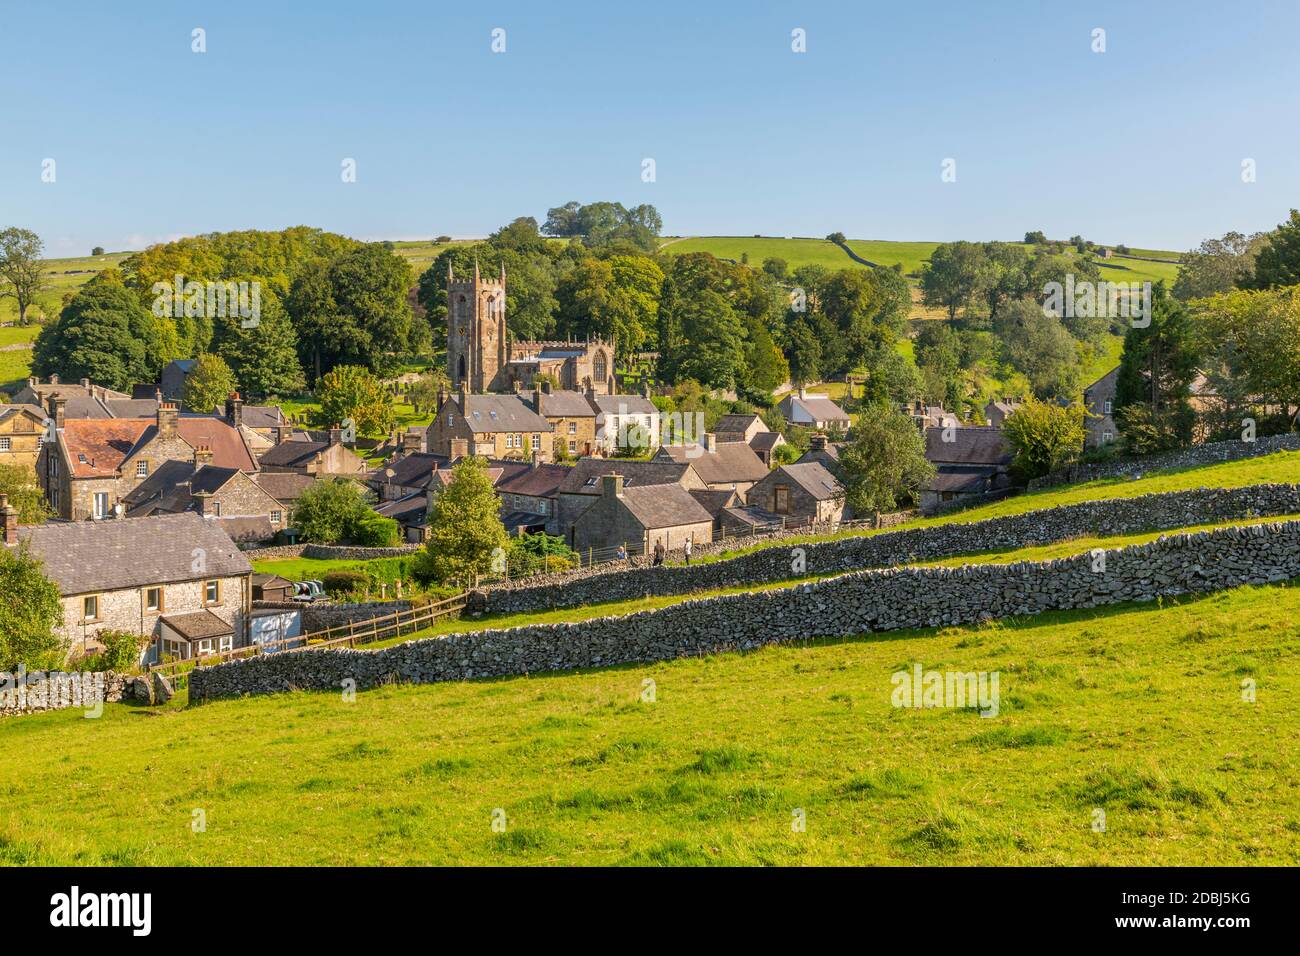 View of village church, cottages and dry stone walls, Hartington, Peak District National Park, Derbyshire, England, United Kingdom, Europe Stock Photo